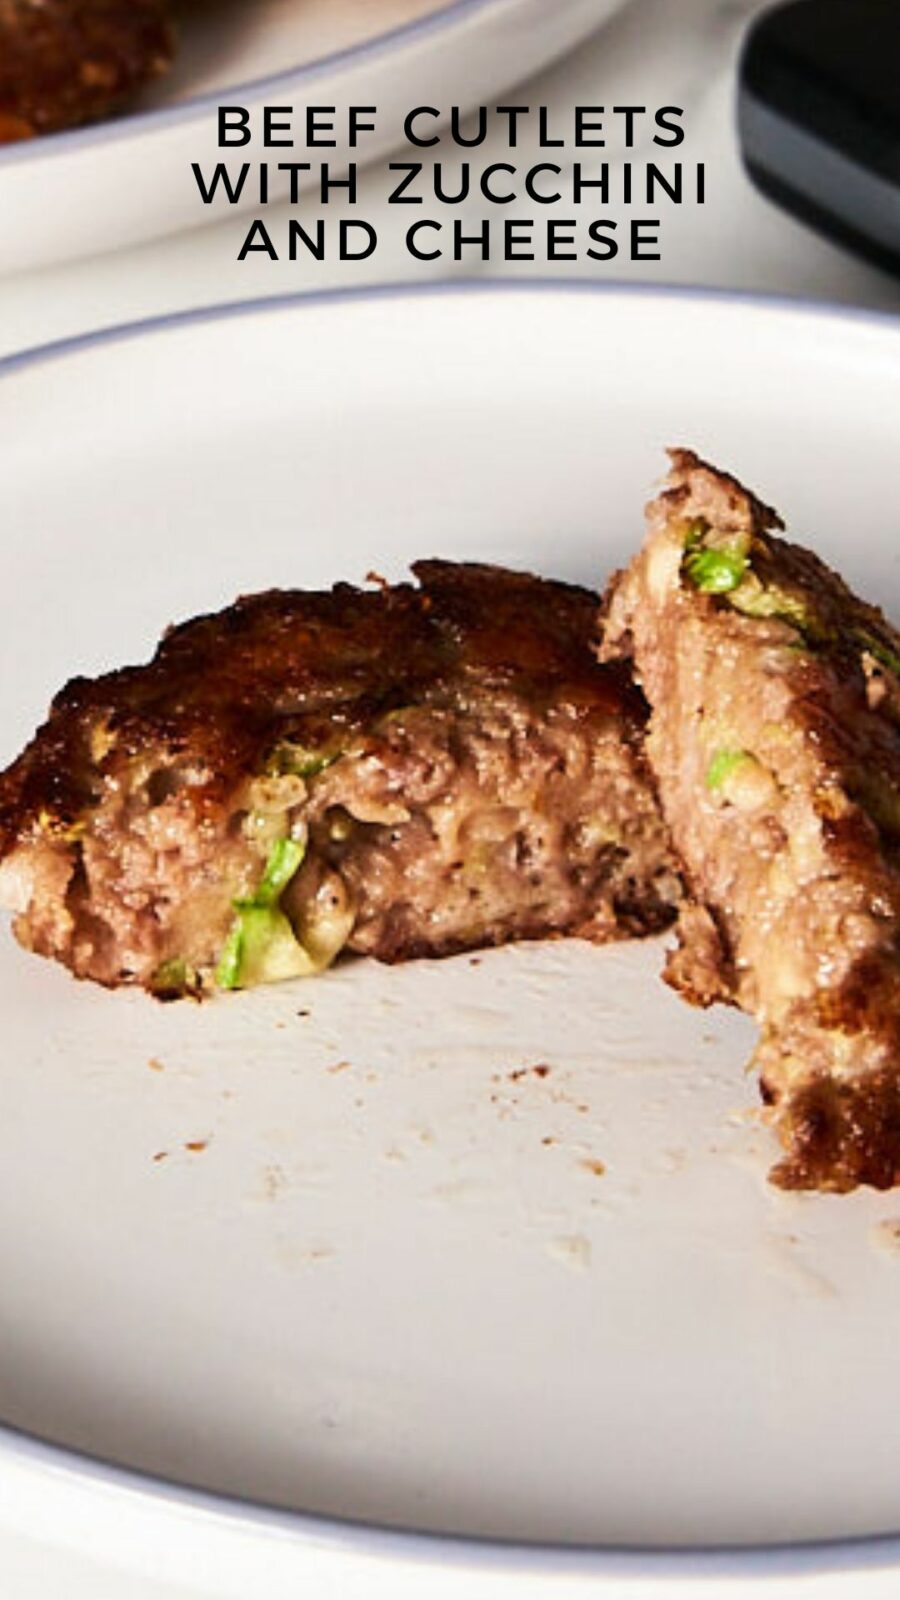 Beef cutlets with zucchini and cheese by bayevskitchen.com